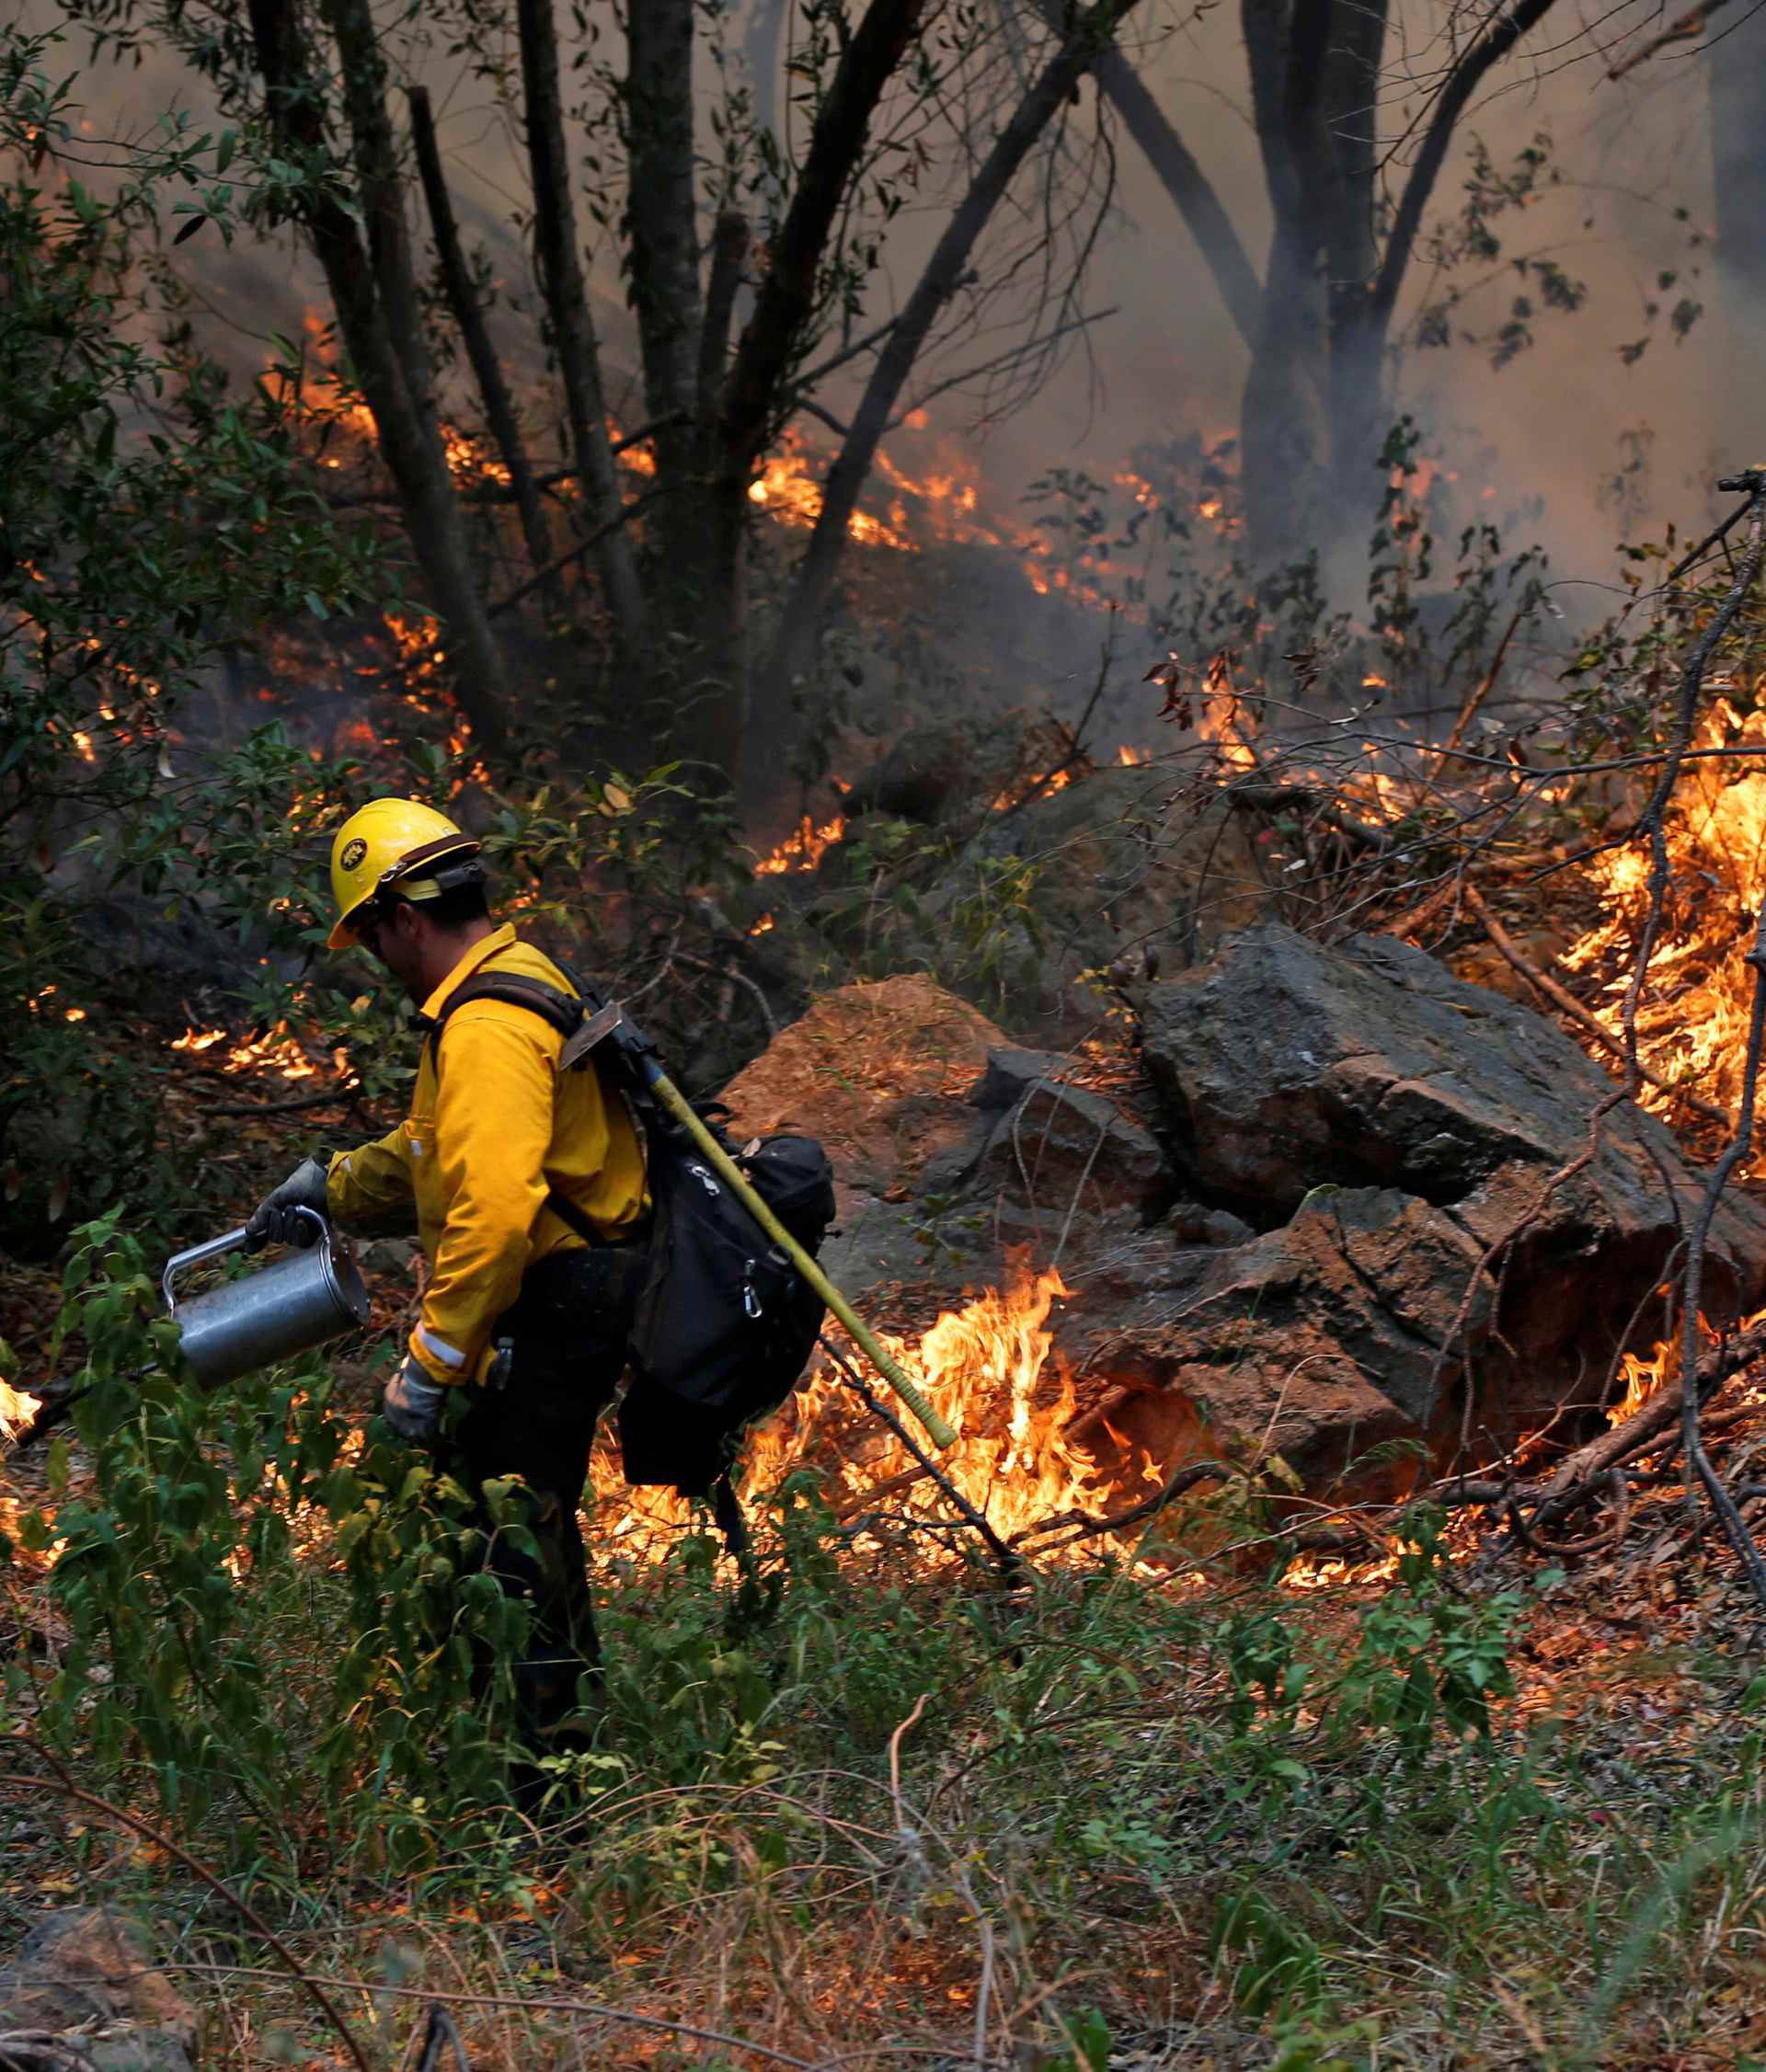 A Hotshots member from the U.S. Forest Department sets a back fire while battling the the so-called "Sherpa Fire", which has grown to over 1100 acres overnight, in the hills near Goleta